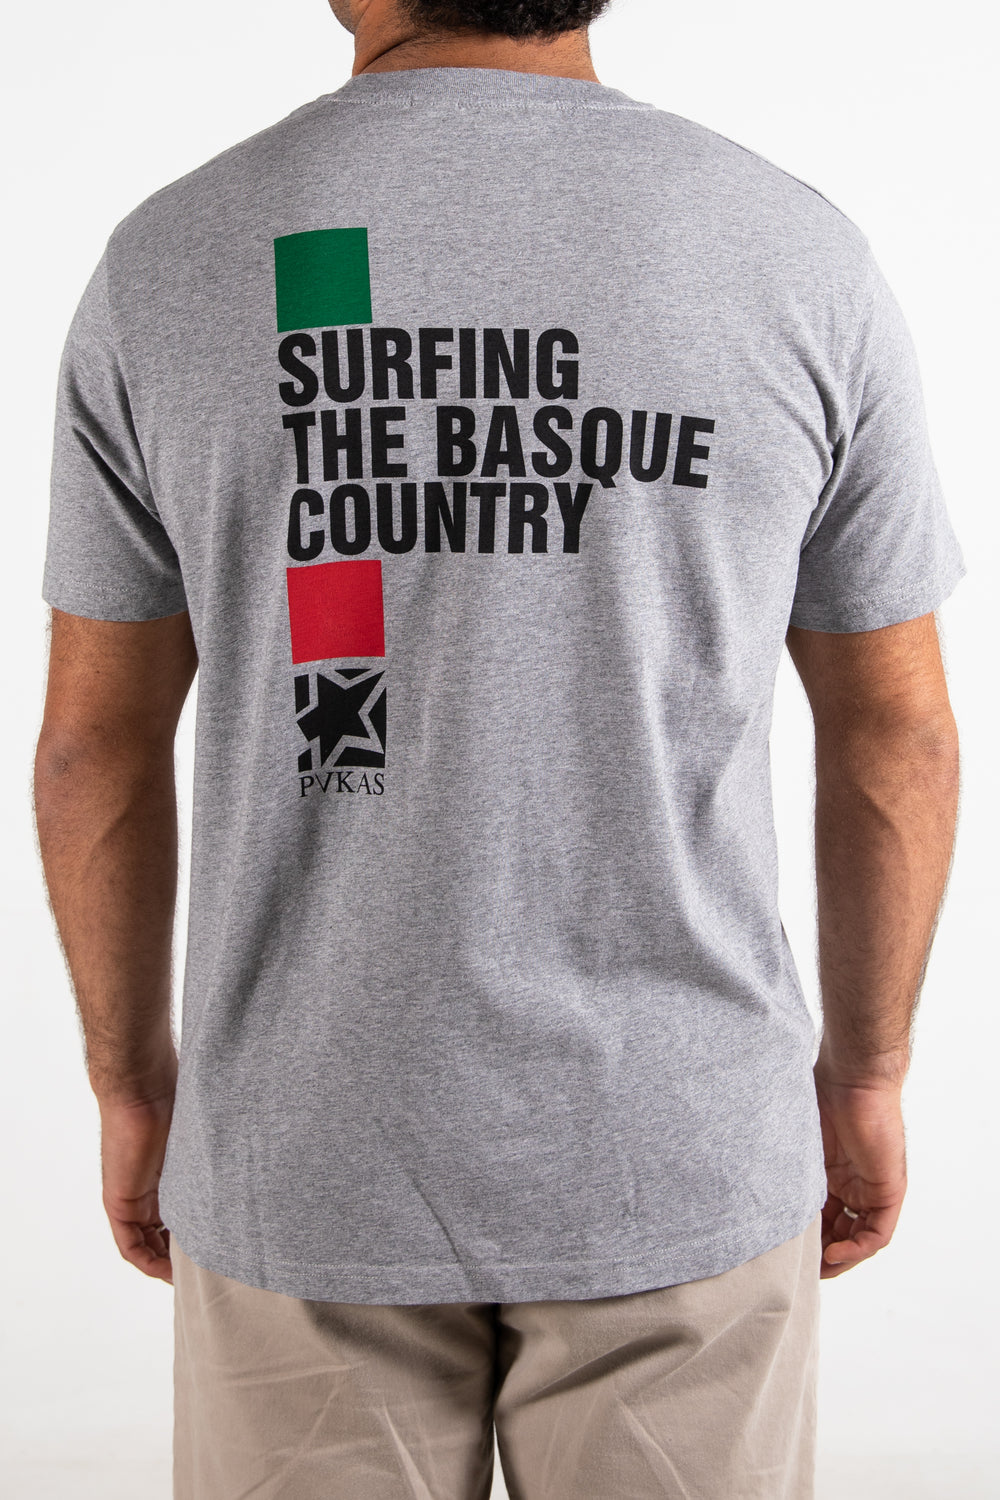 Pukas-Surf-Shop-Surfing-the-Basque-Country